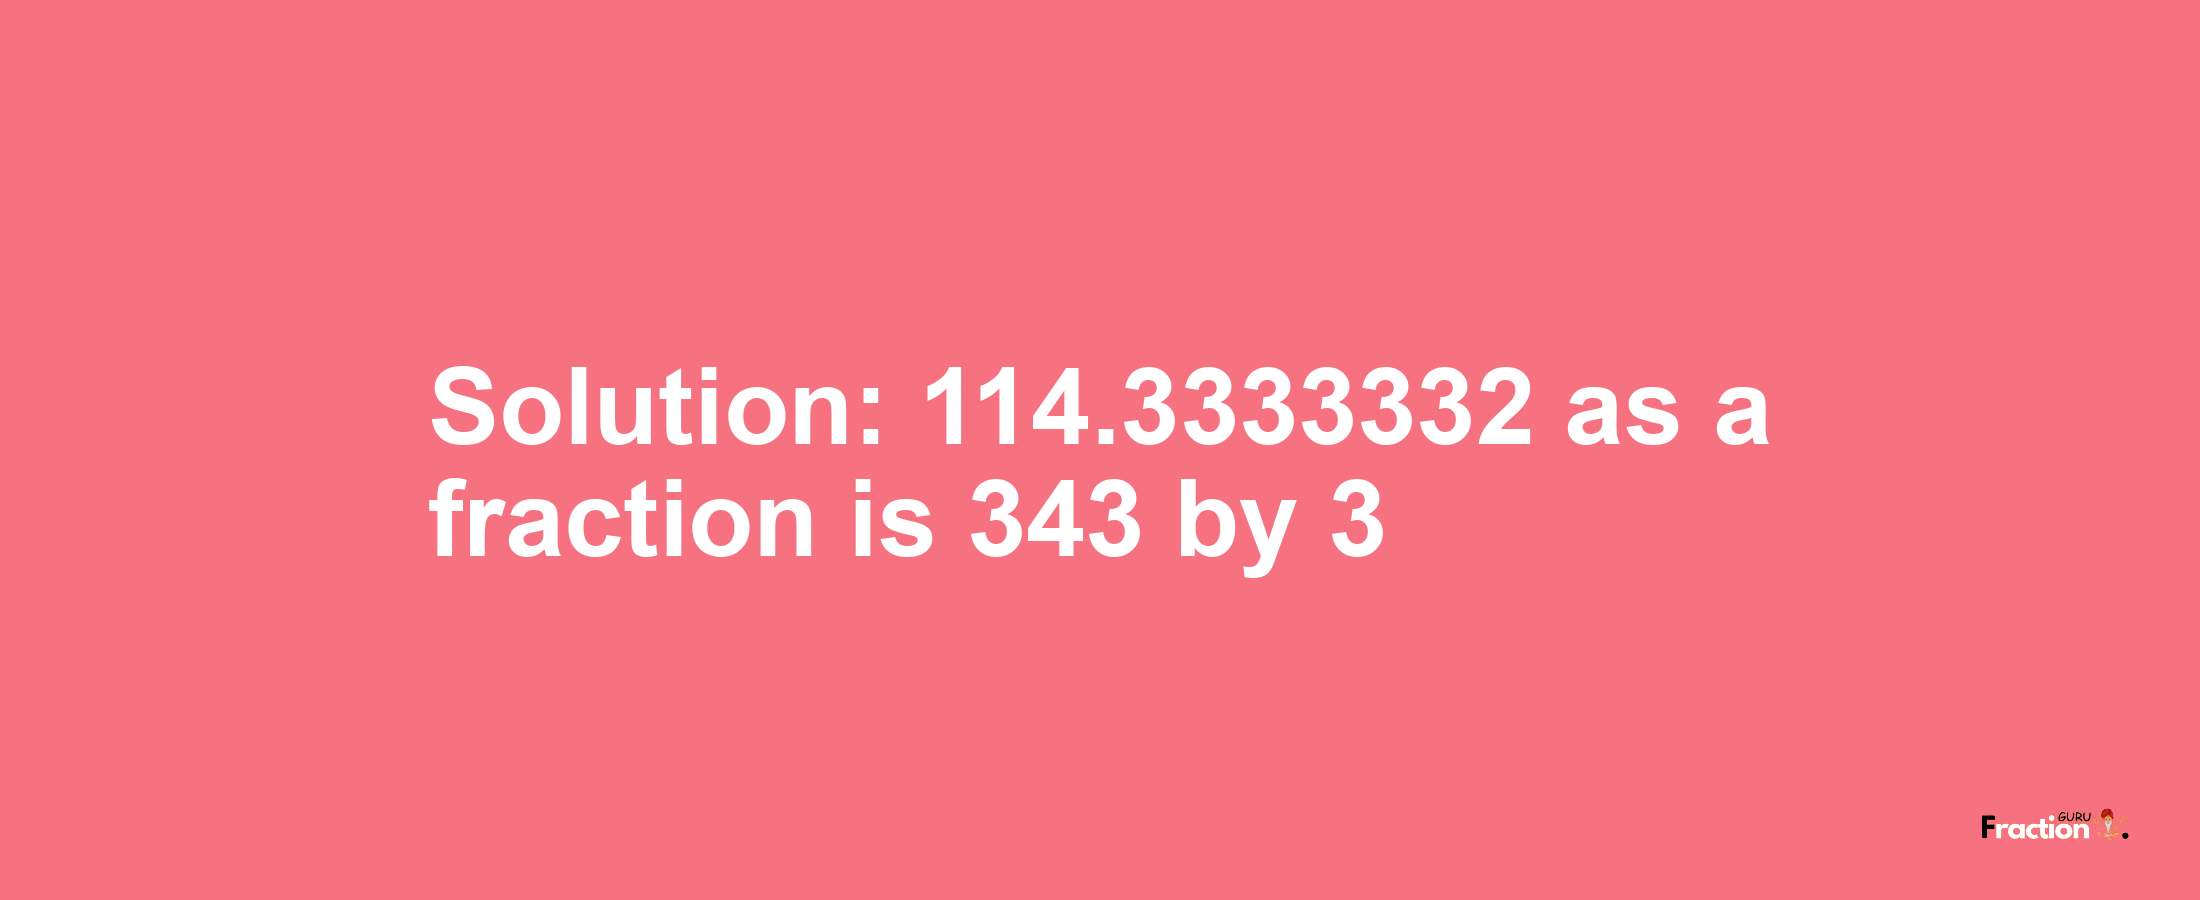 Solution:114.3333332 as a fraction is 343/3